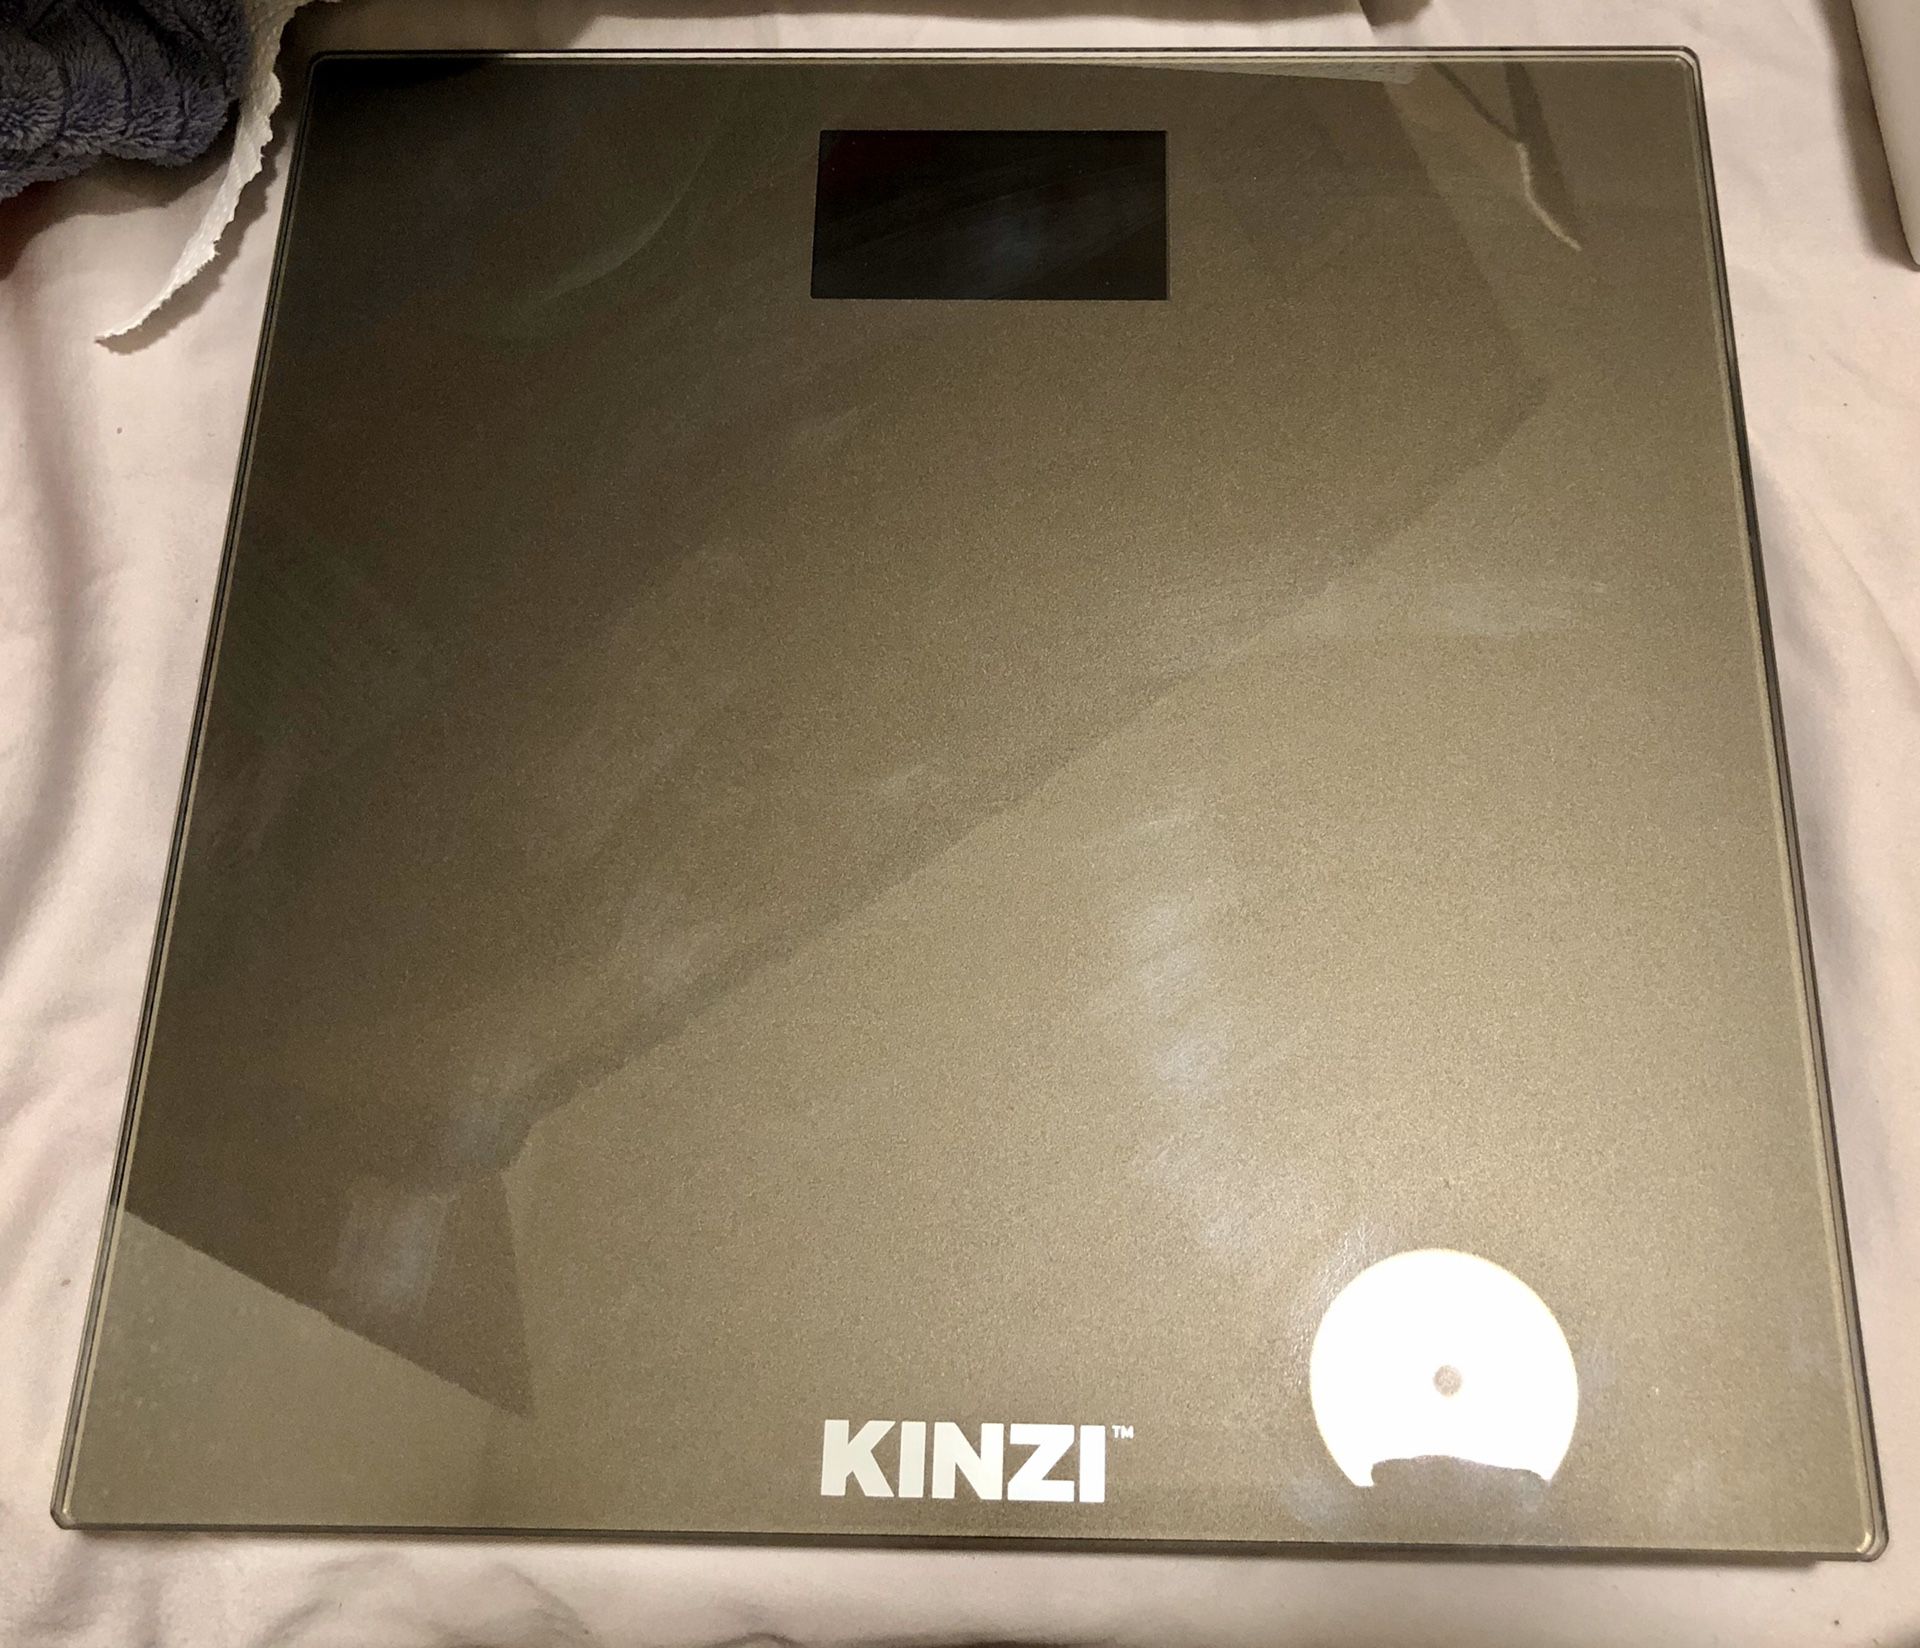 NEW!!! Never Used Kinzi Digital Scale w/Extra Large Lighted Display